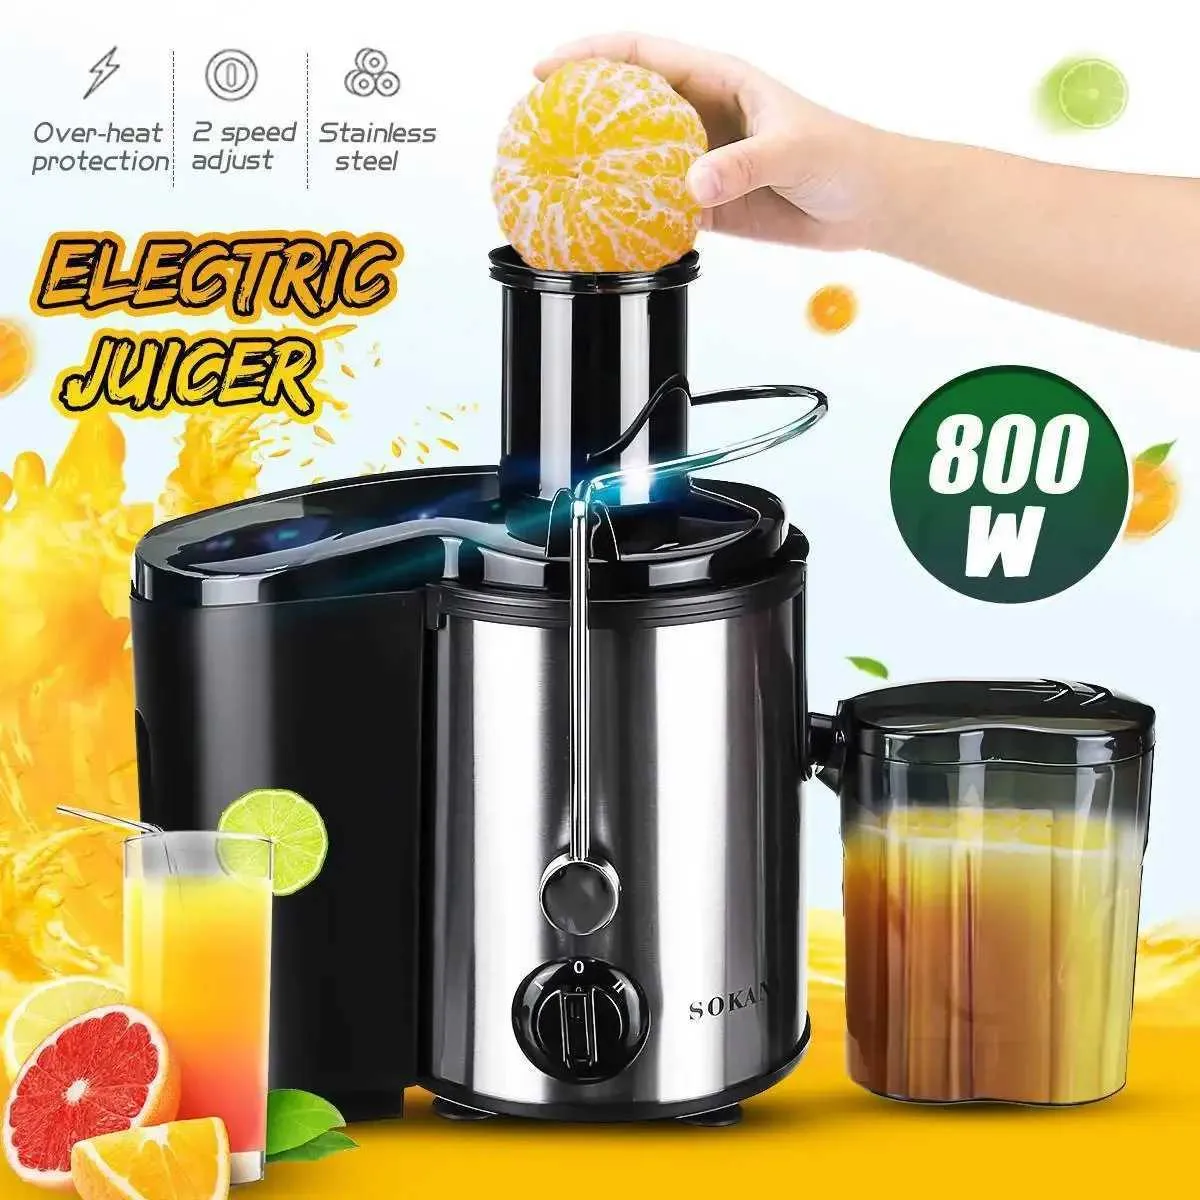 Juicers Juice extractor 800W juicer 3-inch large mouth suitable for all fruits and vegetables juice extractor 2-speed easy to cleanL240401